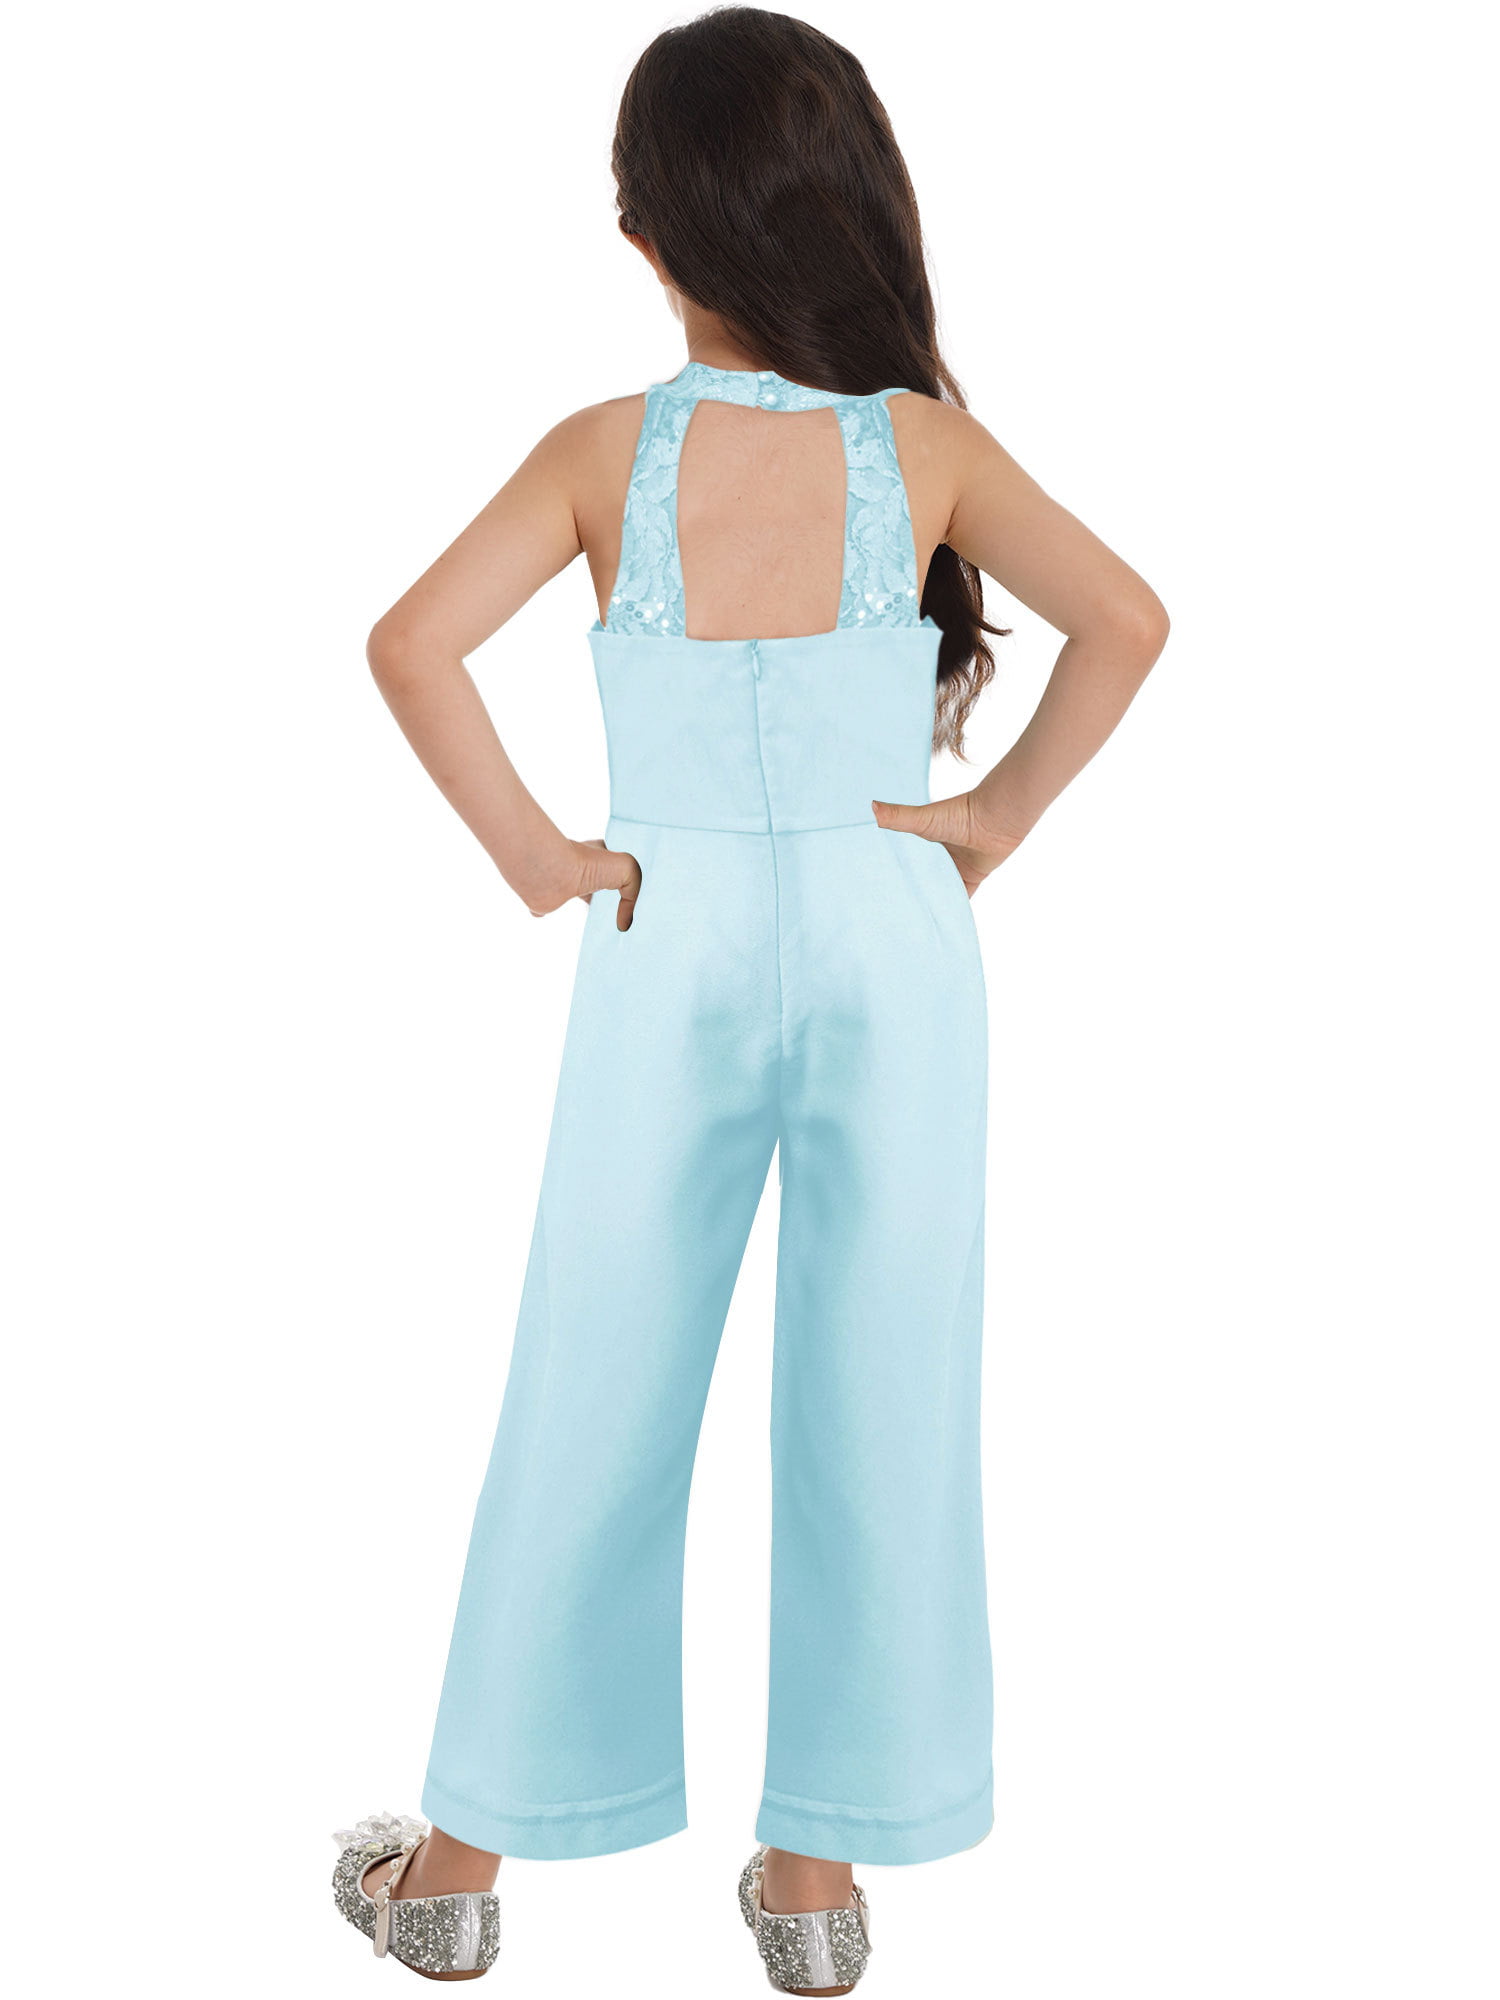 Girls Clothing | Branded New Jumpsuit For 10-14 Year Girl | Freeup